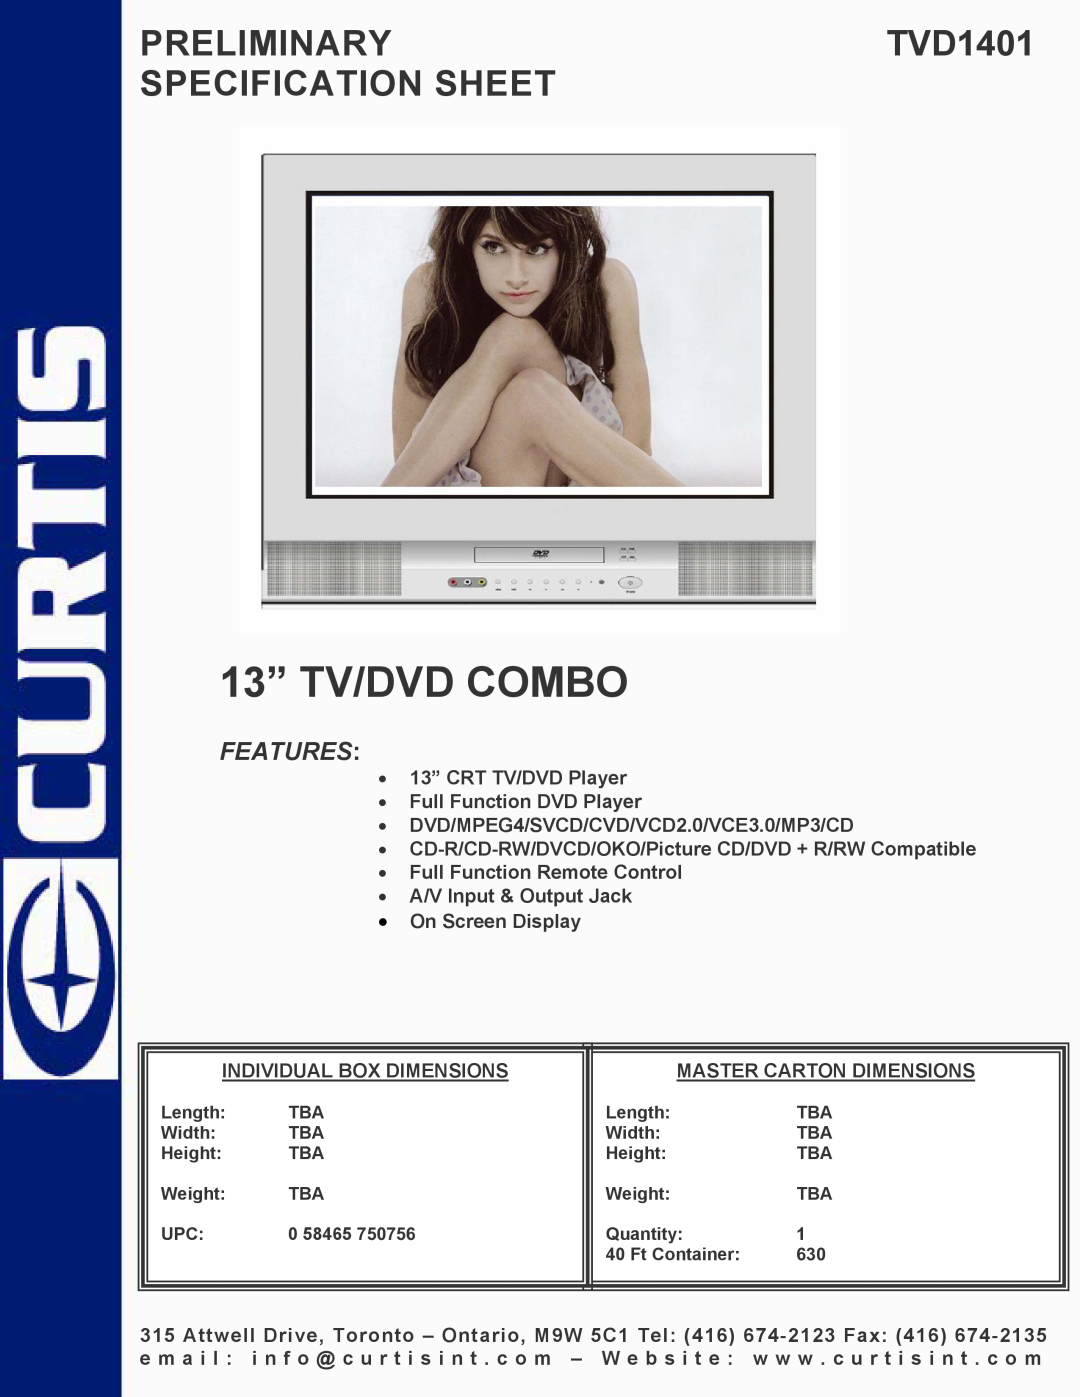 Curtis specifications 13” TV/DVD COMBO, PRELIMINARYTVD1401 SPECIFICATION SHEET, Features 